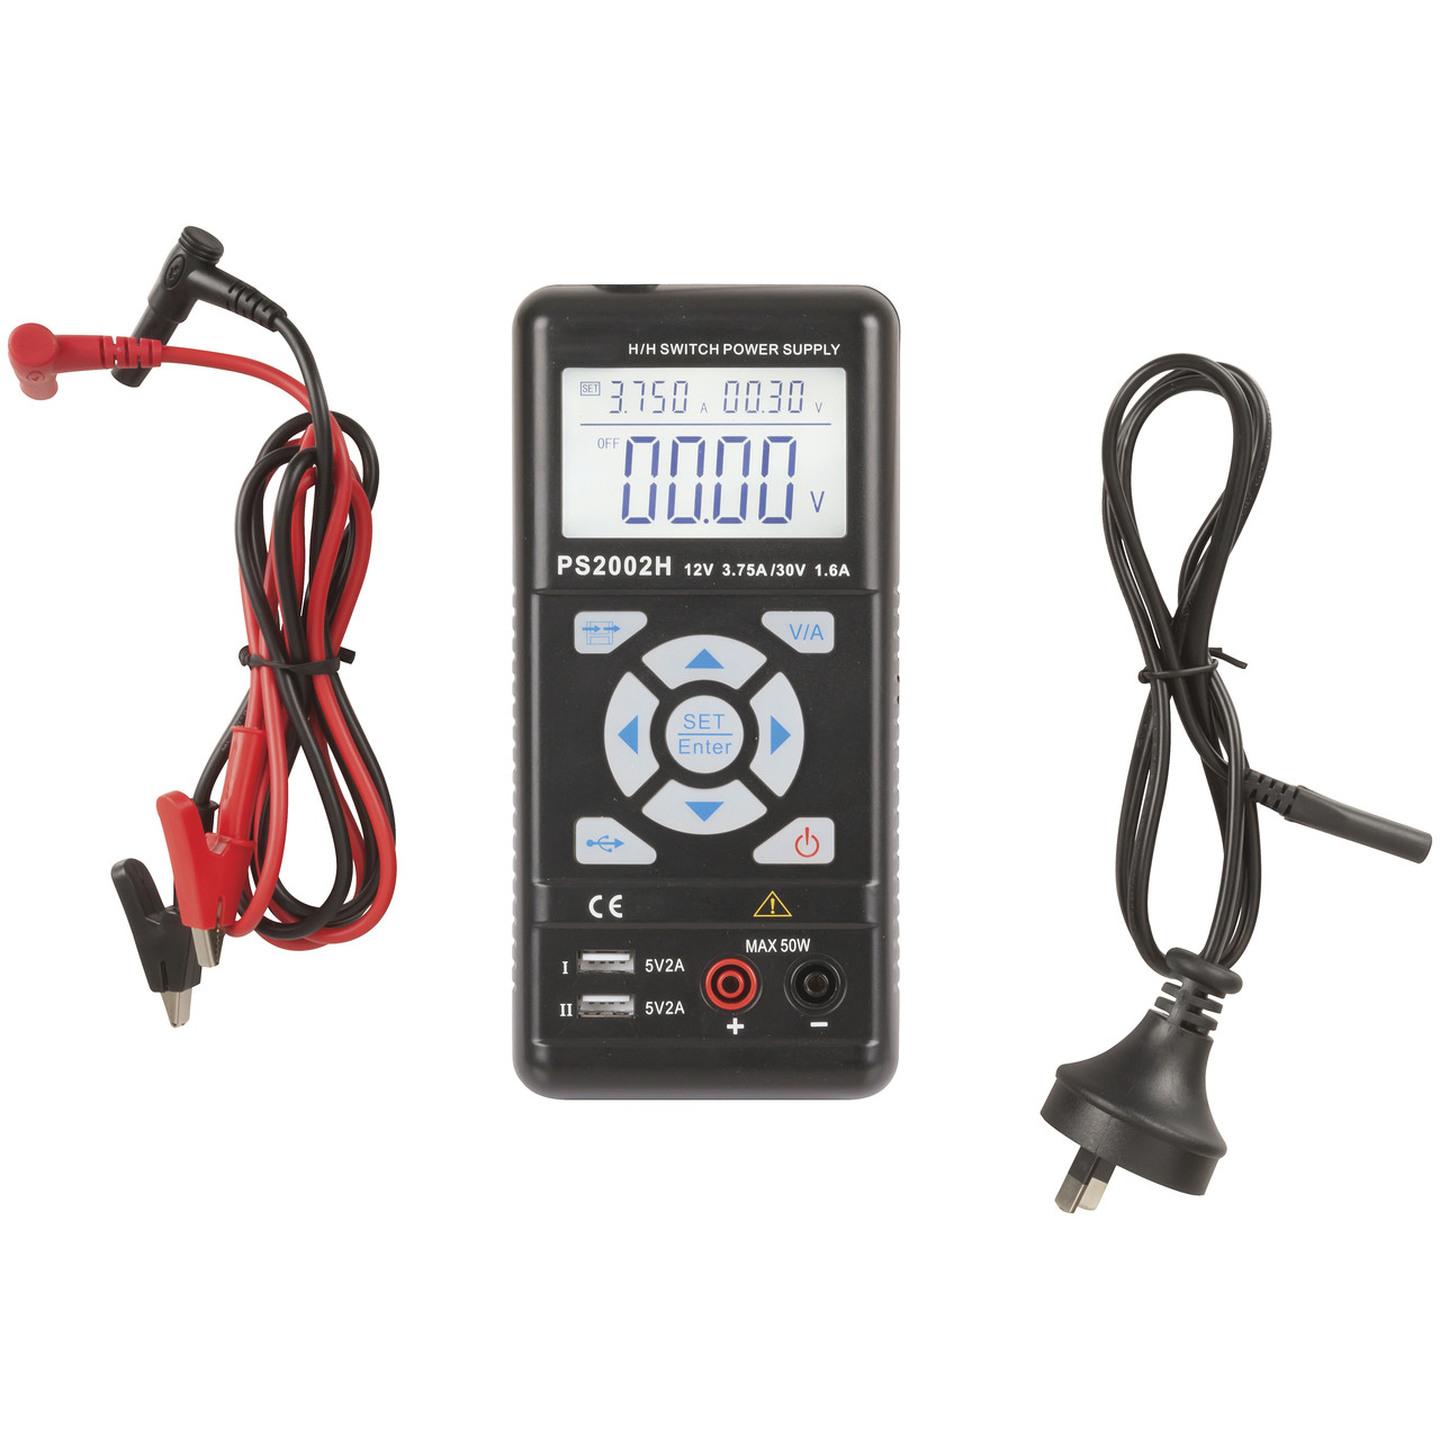 0.3 to 30V 0 to 3.75A Portable Laboratory Power Supply